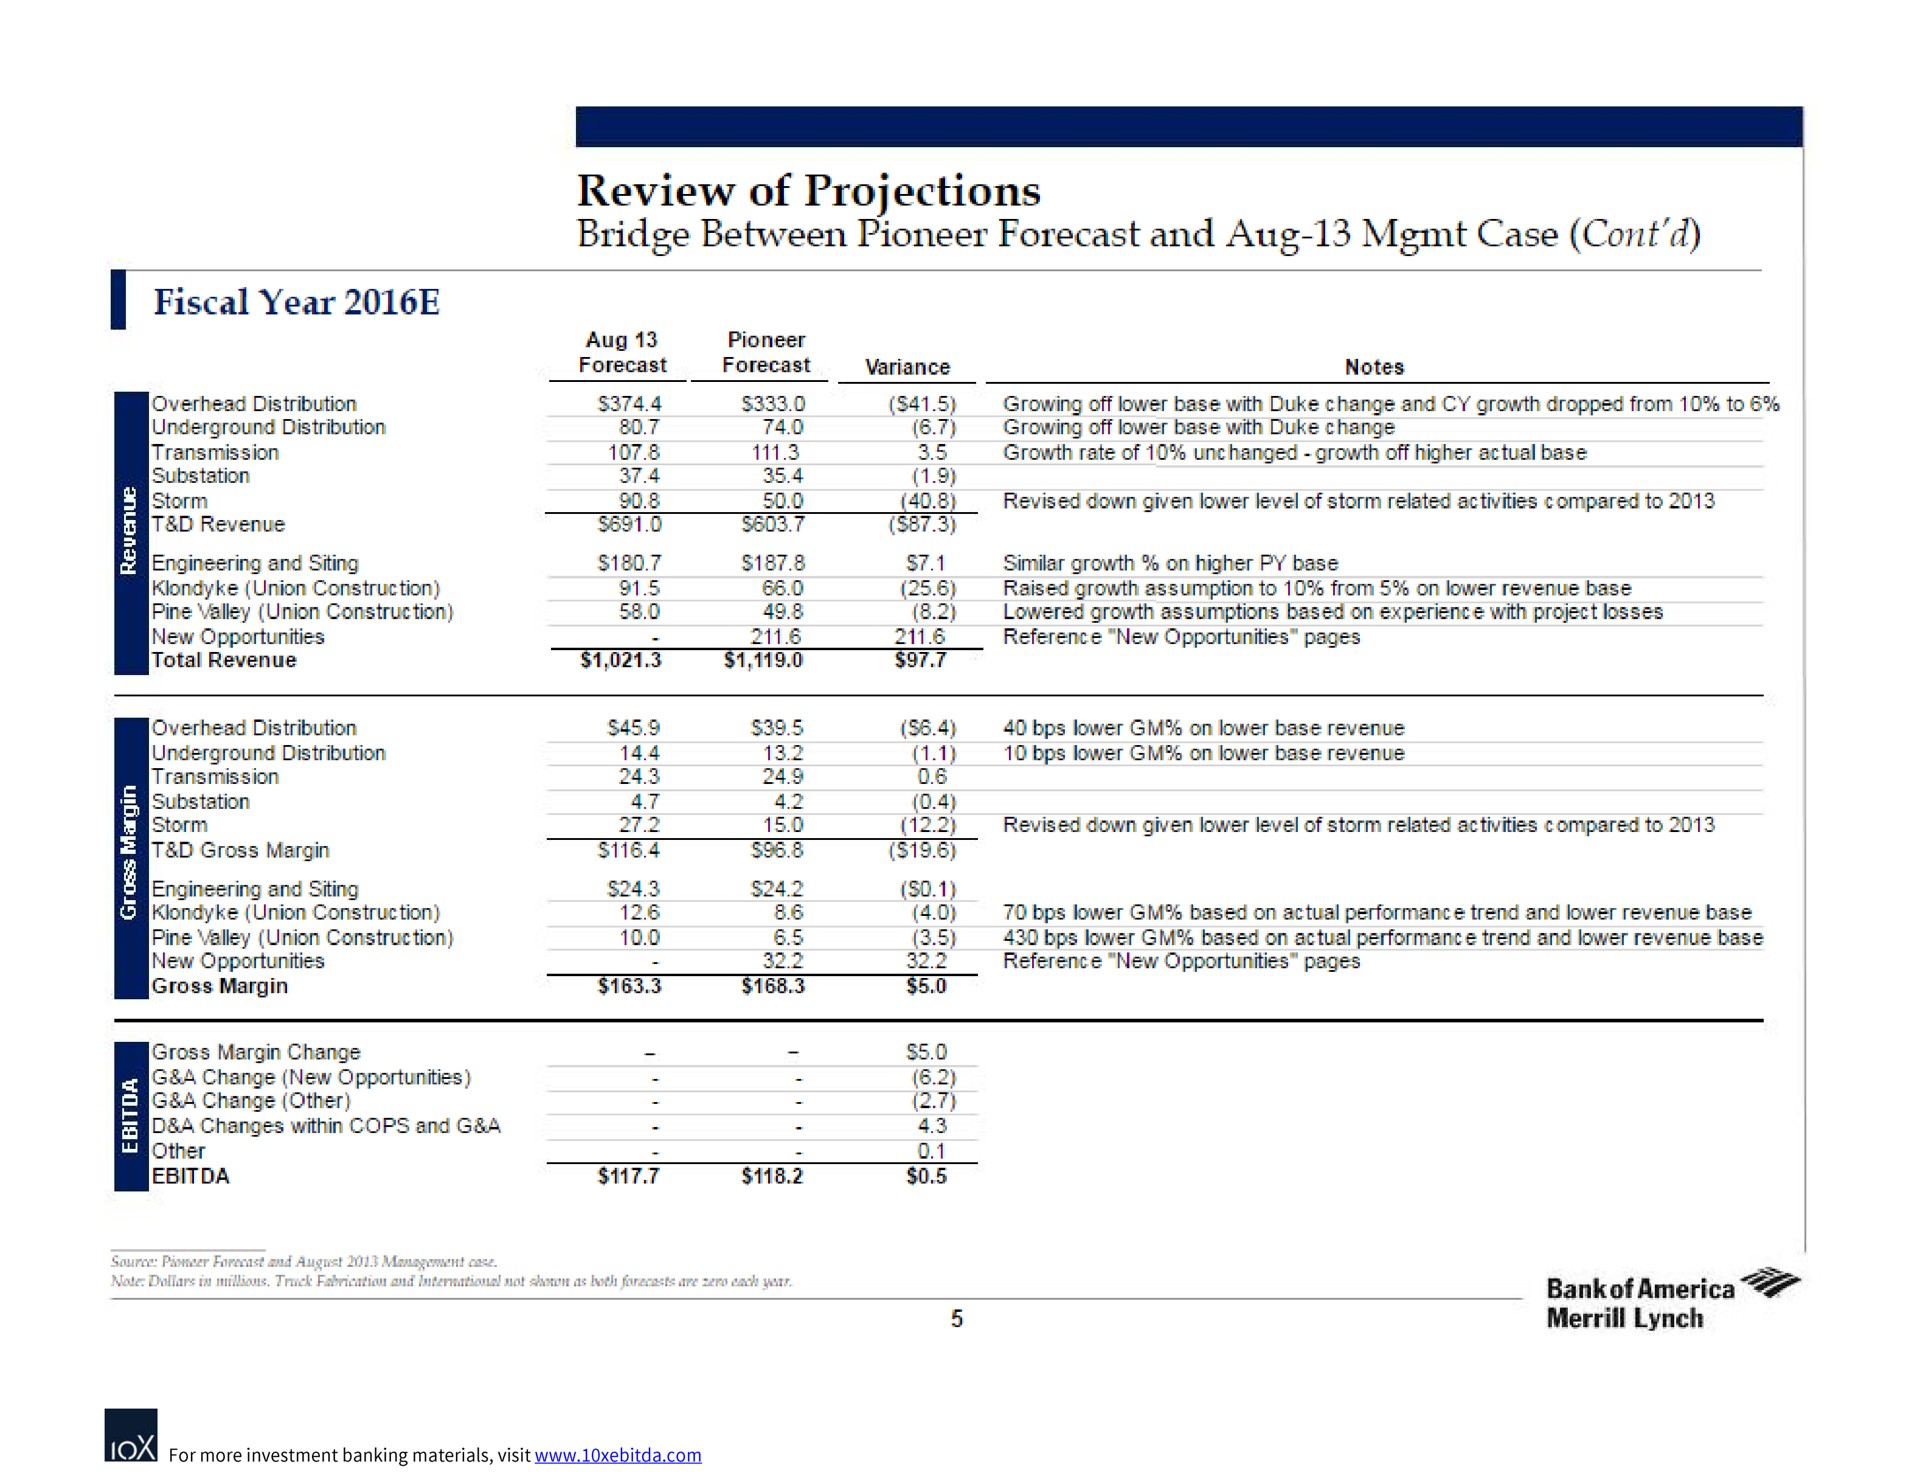 fiscal year review of projections bridge between pioneer forecast and case | Bank of America